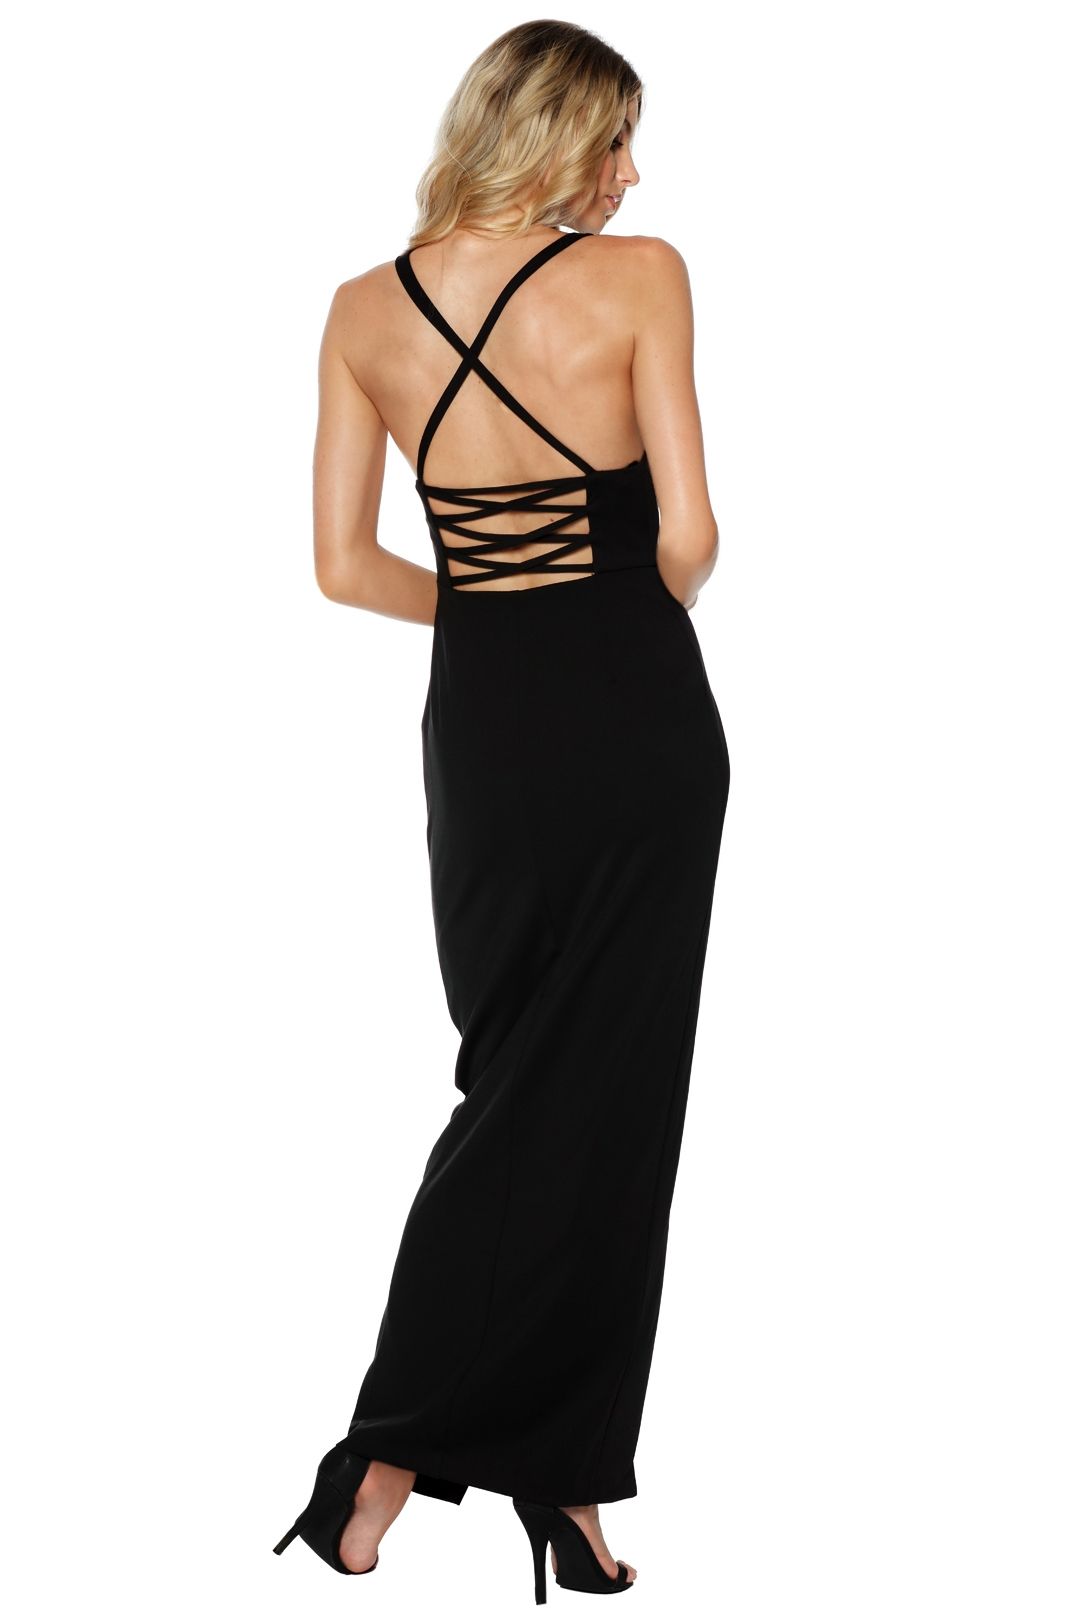 Grace and Hart - Gold Rush Neon Gown - Black - Back